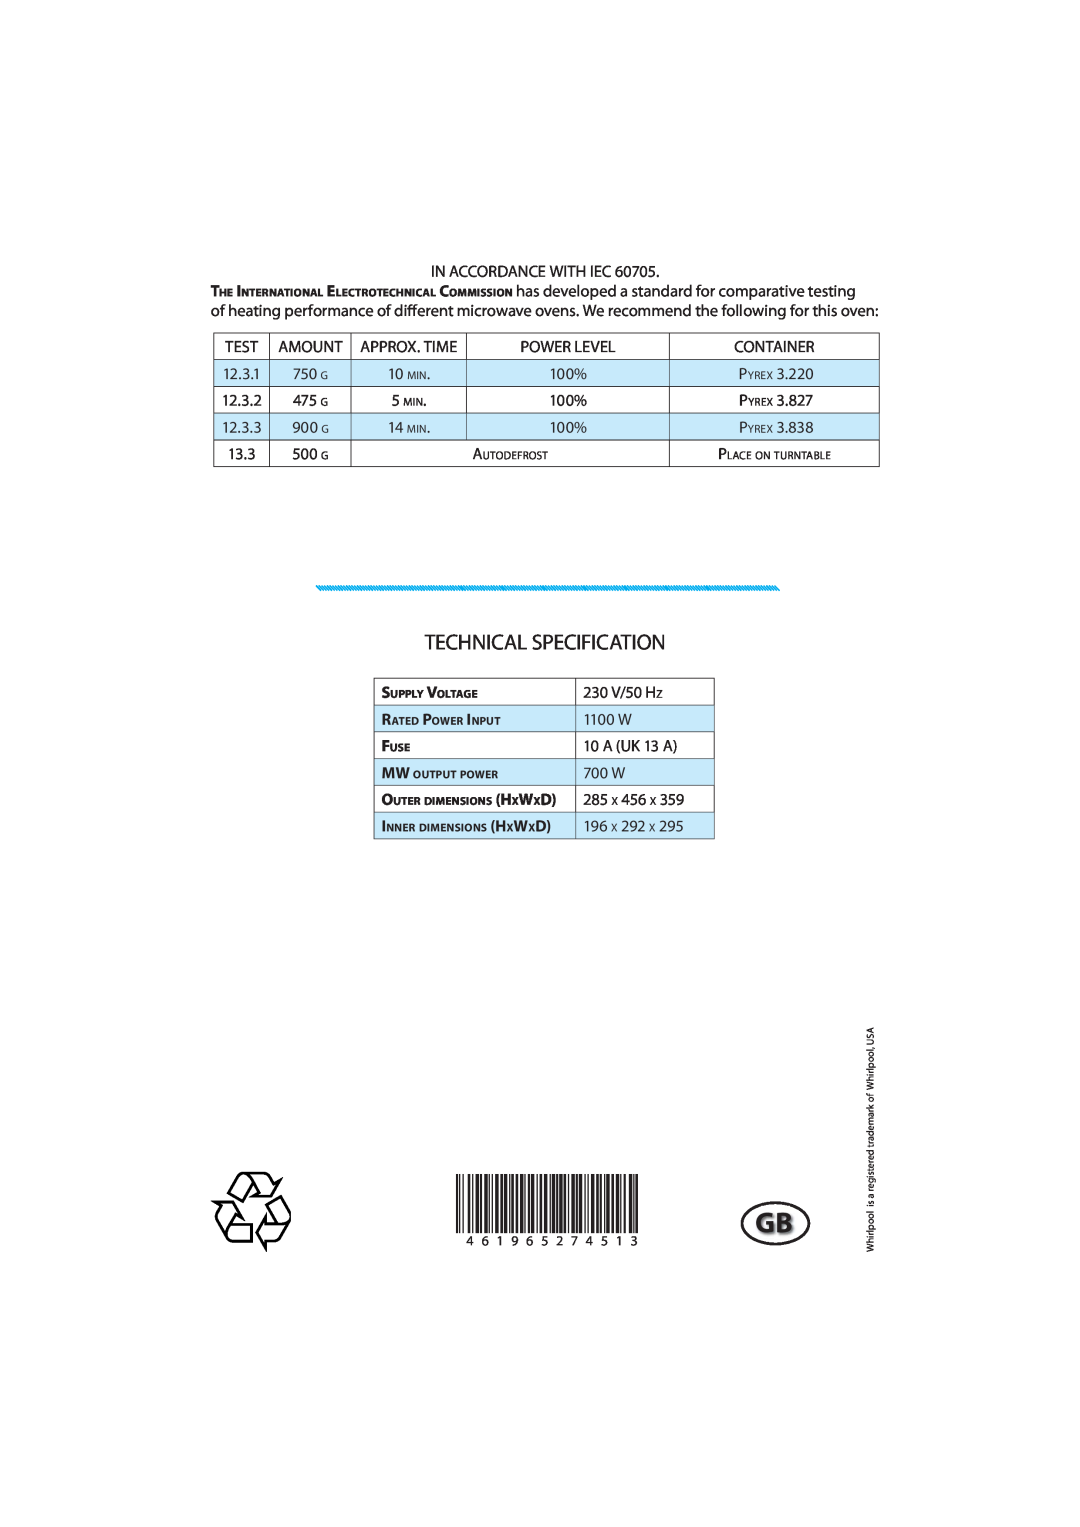 Whirlpool MWD 207 manual Technical Specification, 230 V/50 H Z, 1100 W, A UK 13 A, 700 W, 285 X, 196 